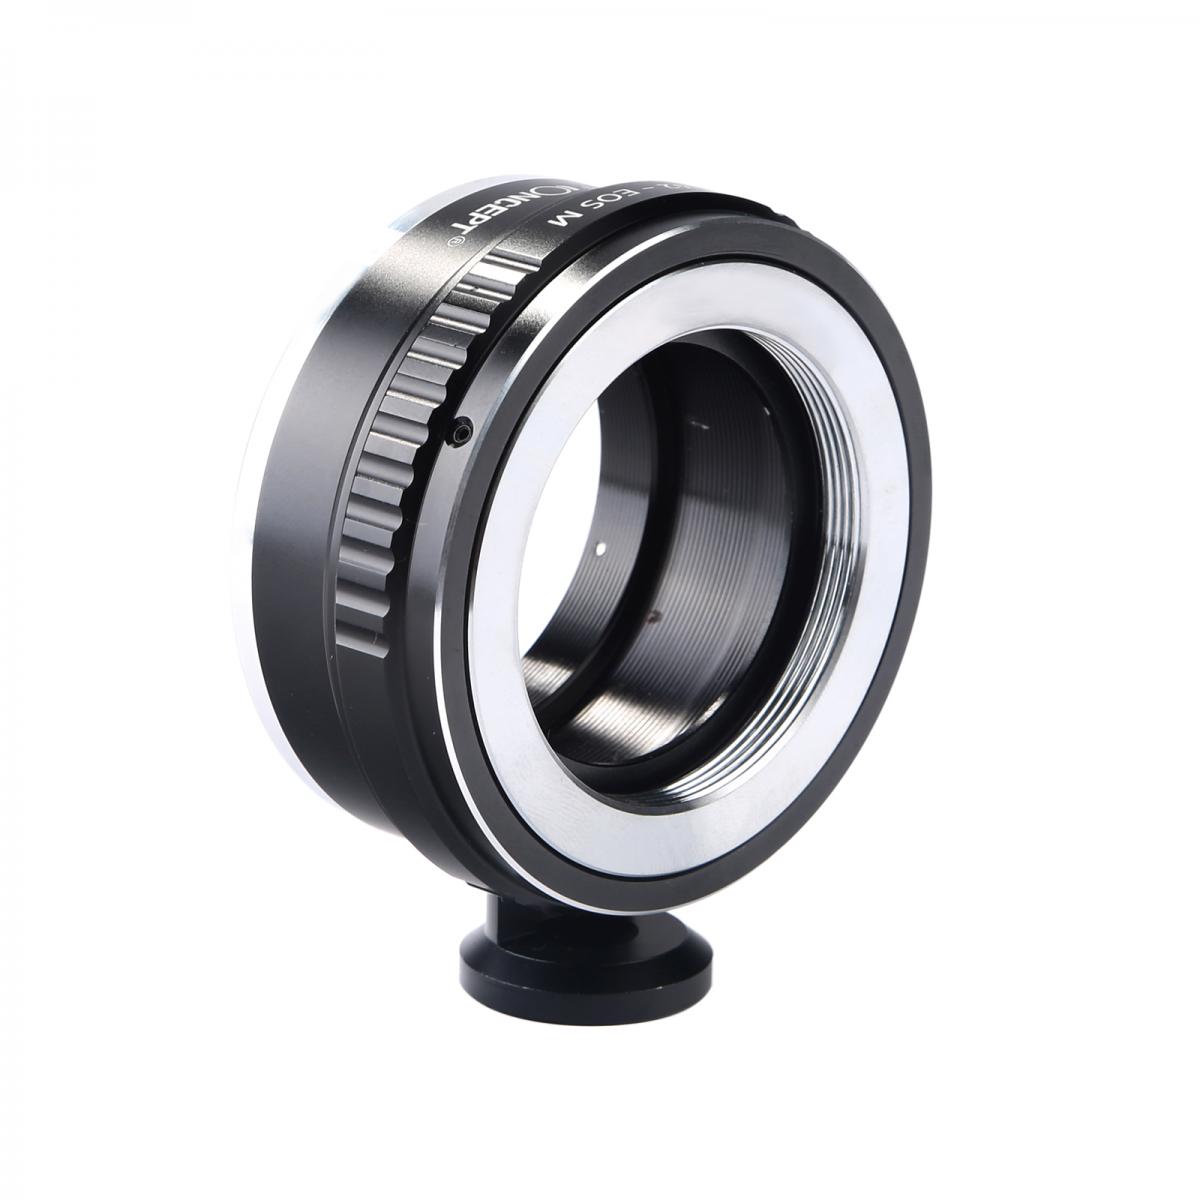 Lens Adapters M42 Lens To Canon Eos M Camera Mount Adapter Kandf Concept